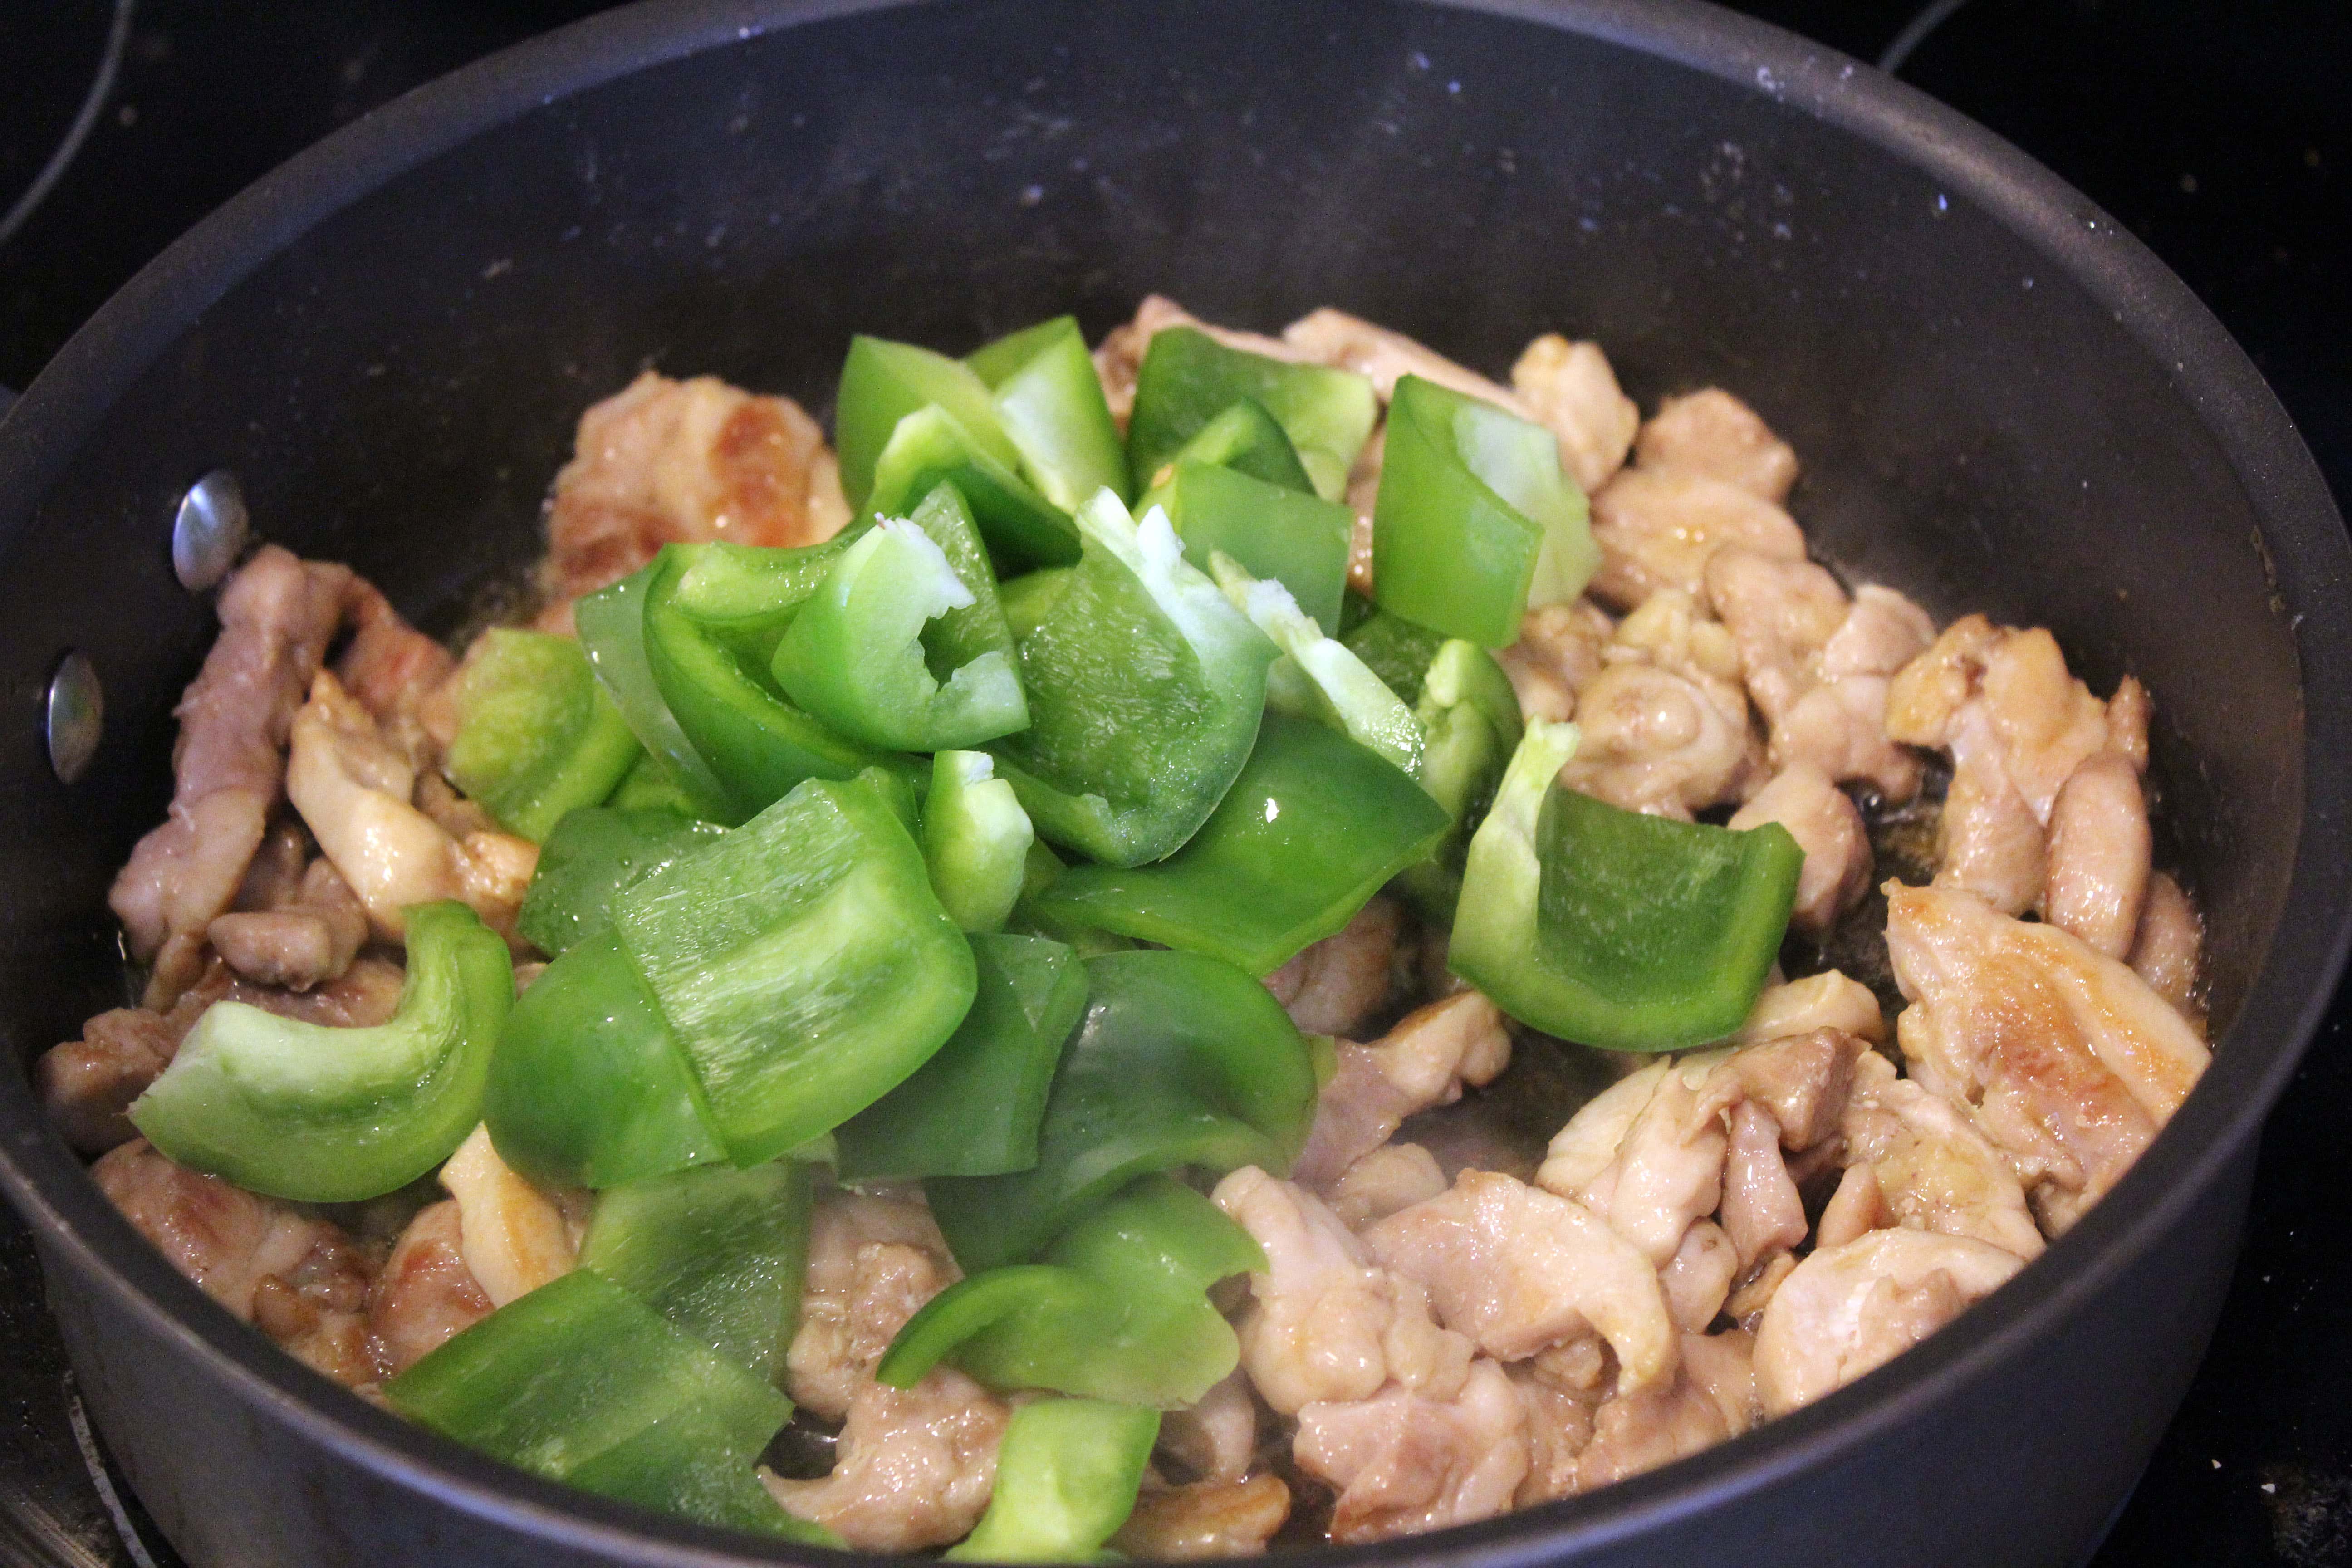 Add peppers to chicken